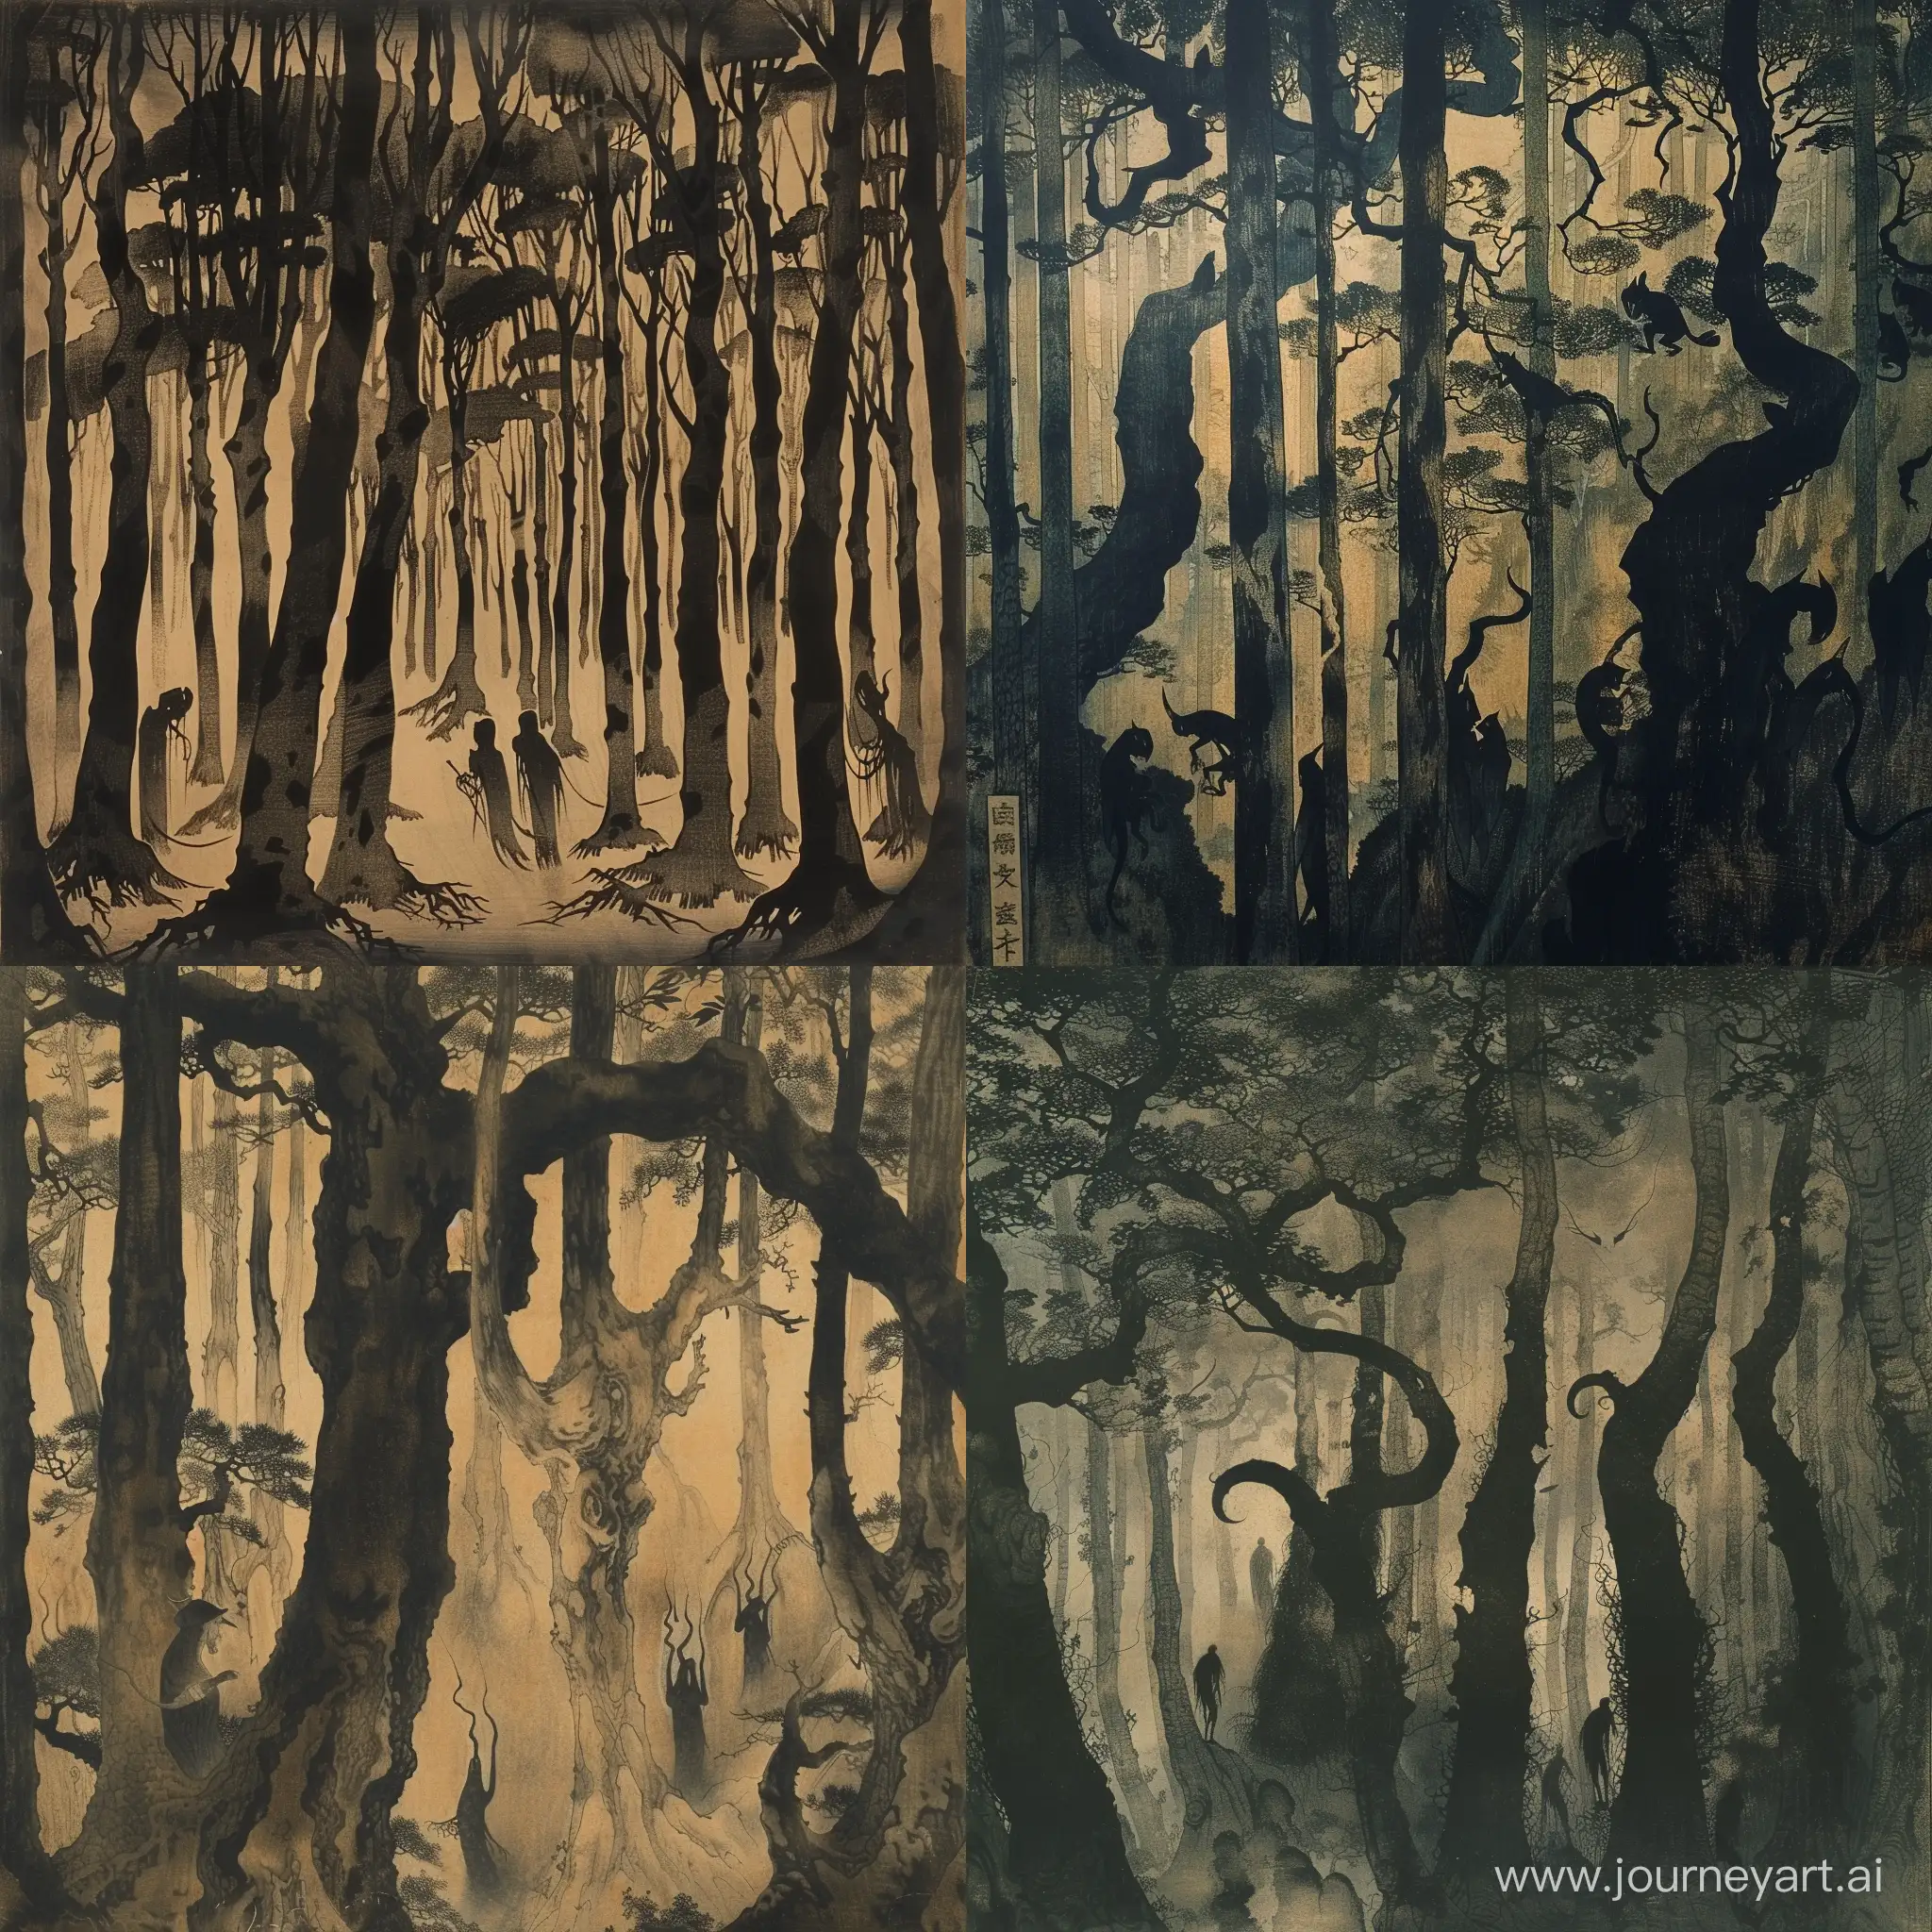 A dense forest cloaked in perpetual darkness, where twisted trees loom overhead and strange creatures lurk in the shadows. The air is thick with a sense of unease, and travelers who venture too far risk becoming lost forever in its labyrinthine depths, silhouetted creatures lurks in the trees,  Ukiyo-E painting style, woodblock prints, vintage, japanese style, edo period, detailed